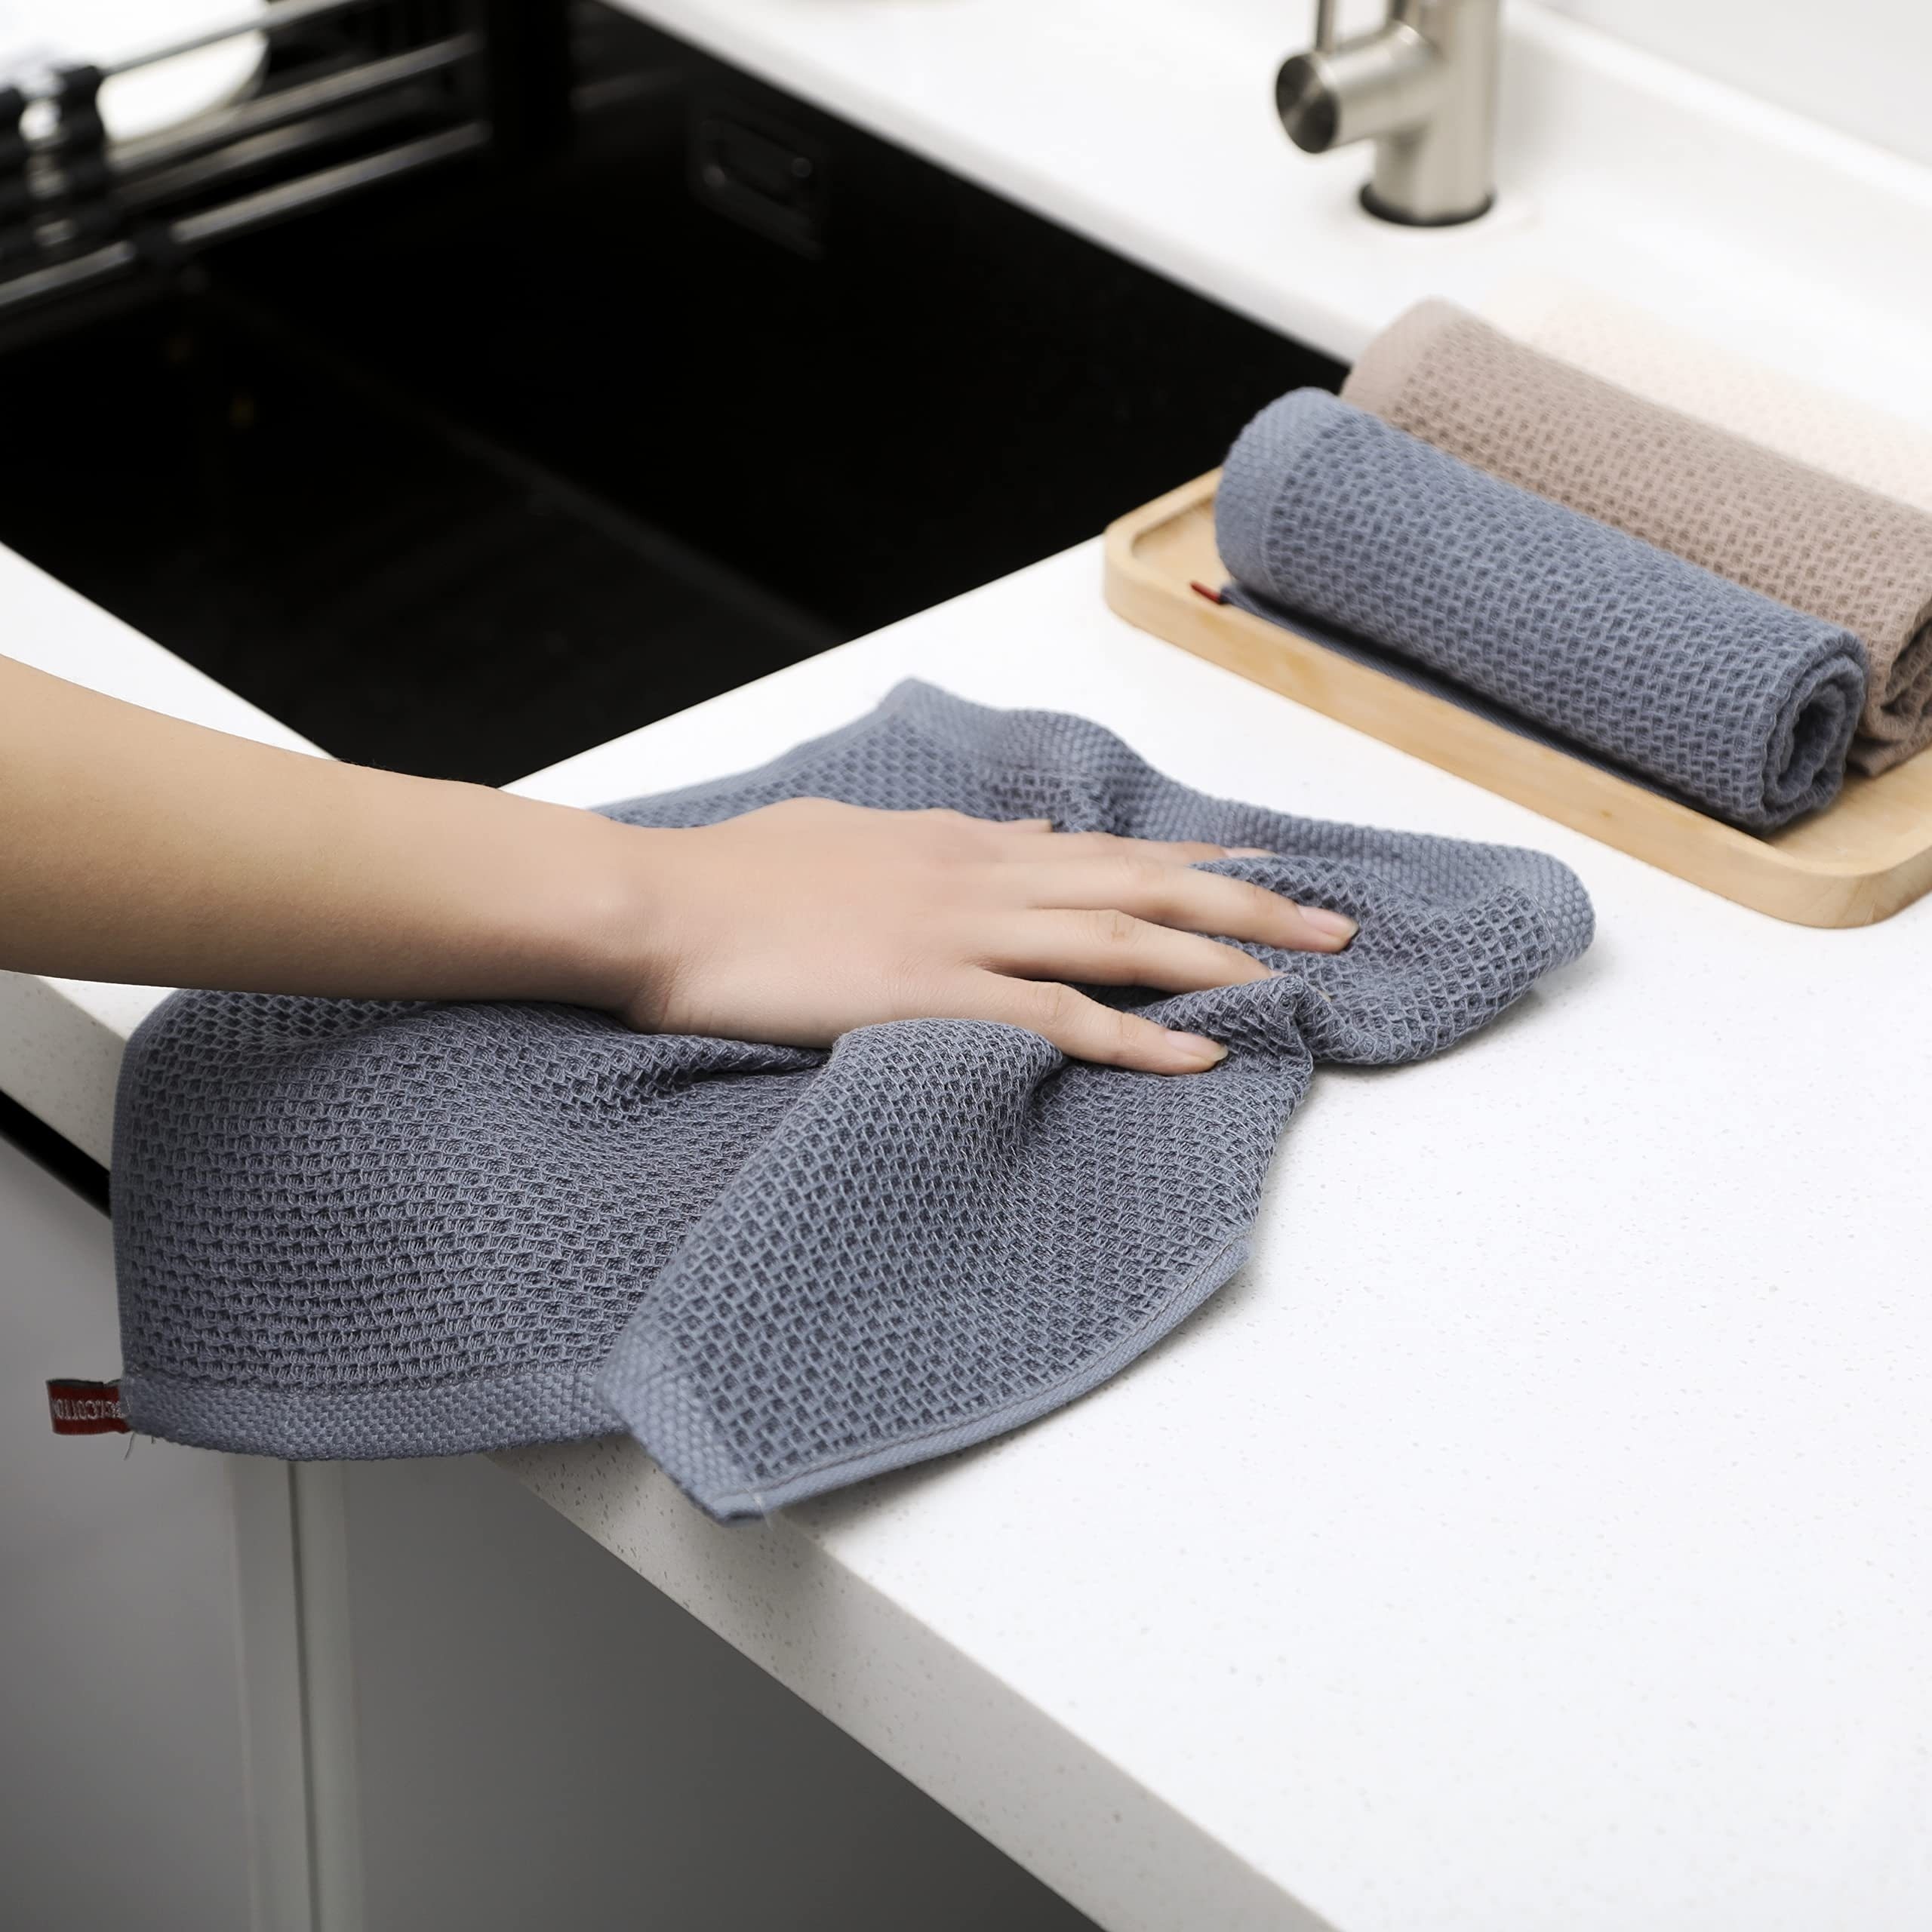 50pcsroll Disposable Dish Cloth Home Cleaning Towels Kitchen Housework Dish Cleaning Cloths Wiping Pad Absorbent Dry Quickly Dishcloth Bathroom